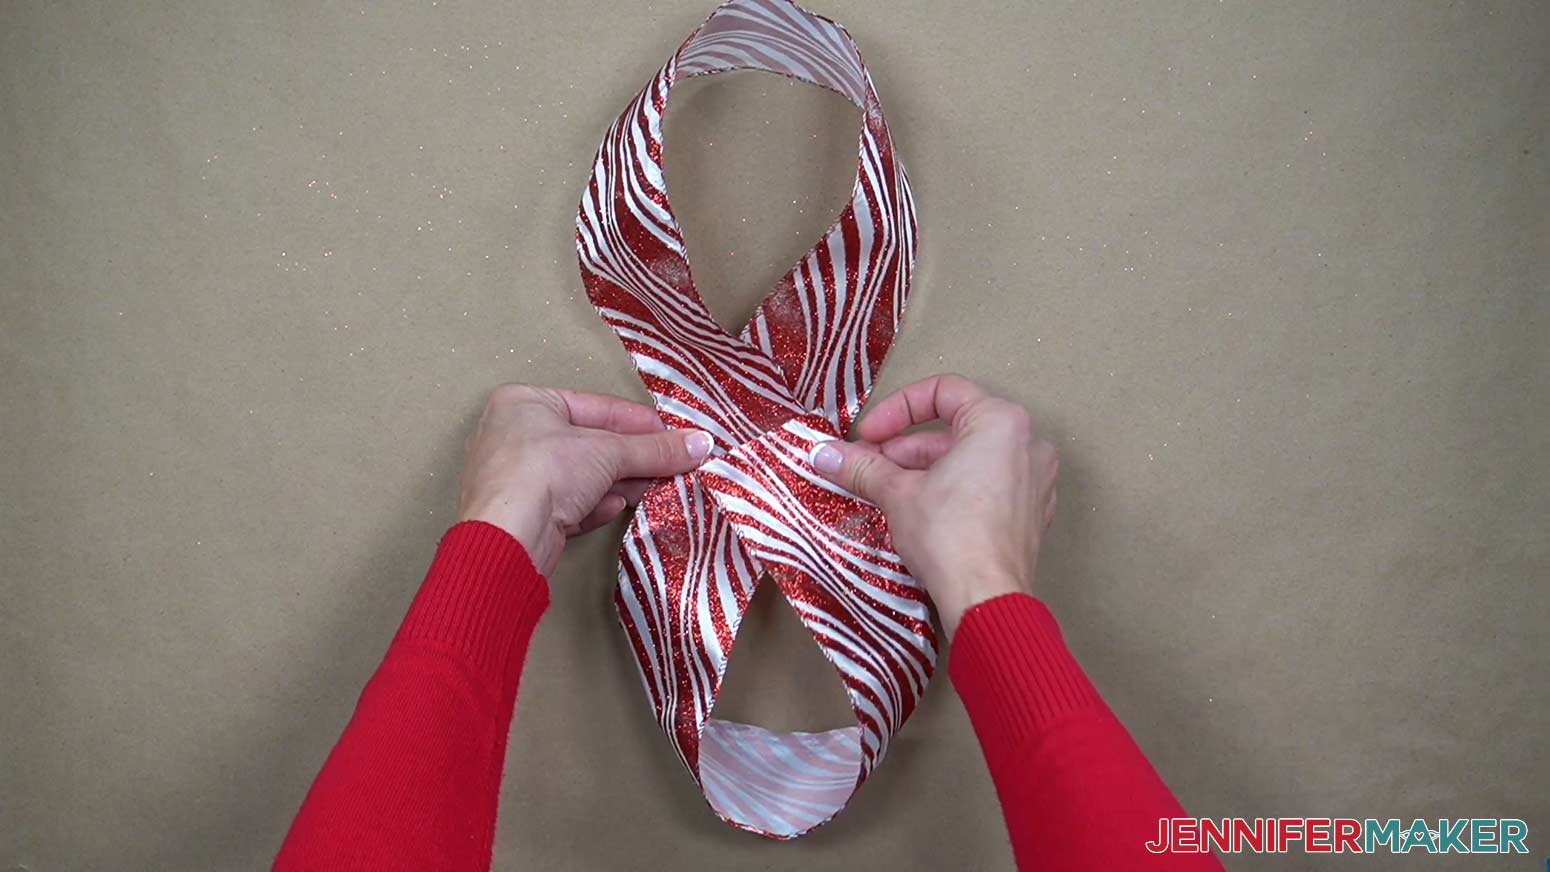 Make two loops in the ribbon and connect the ends together to form a figure eight.